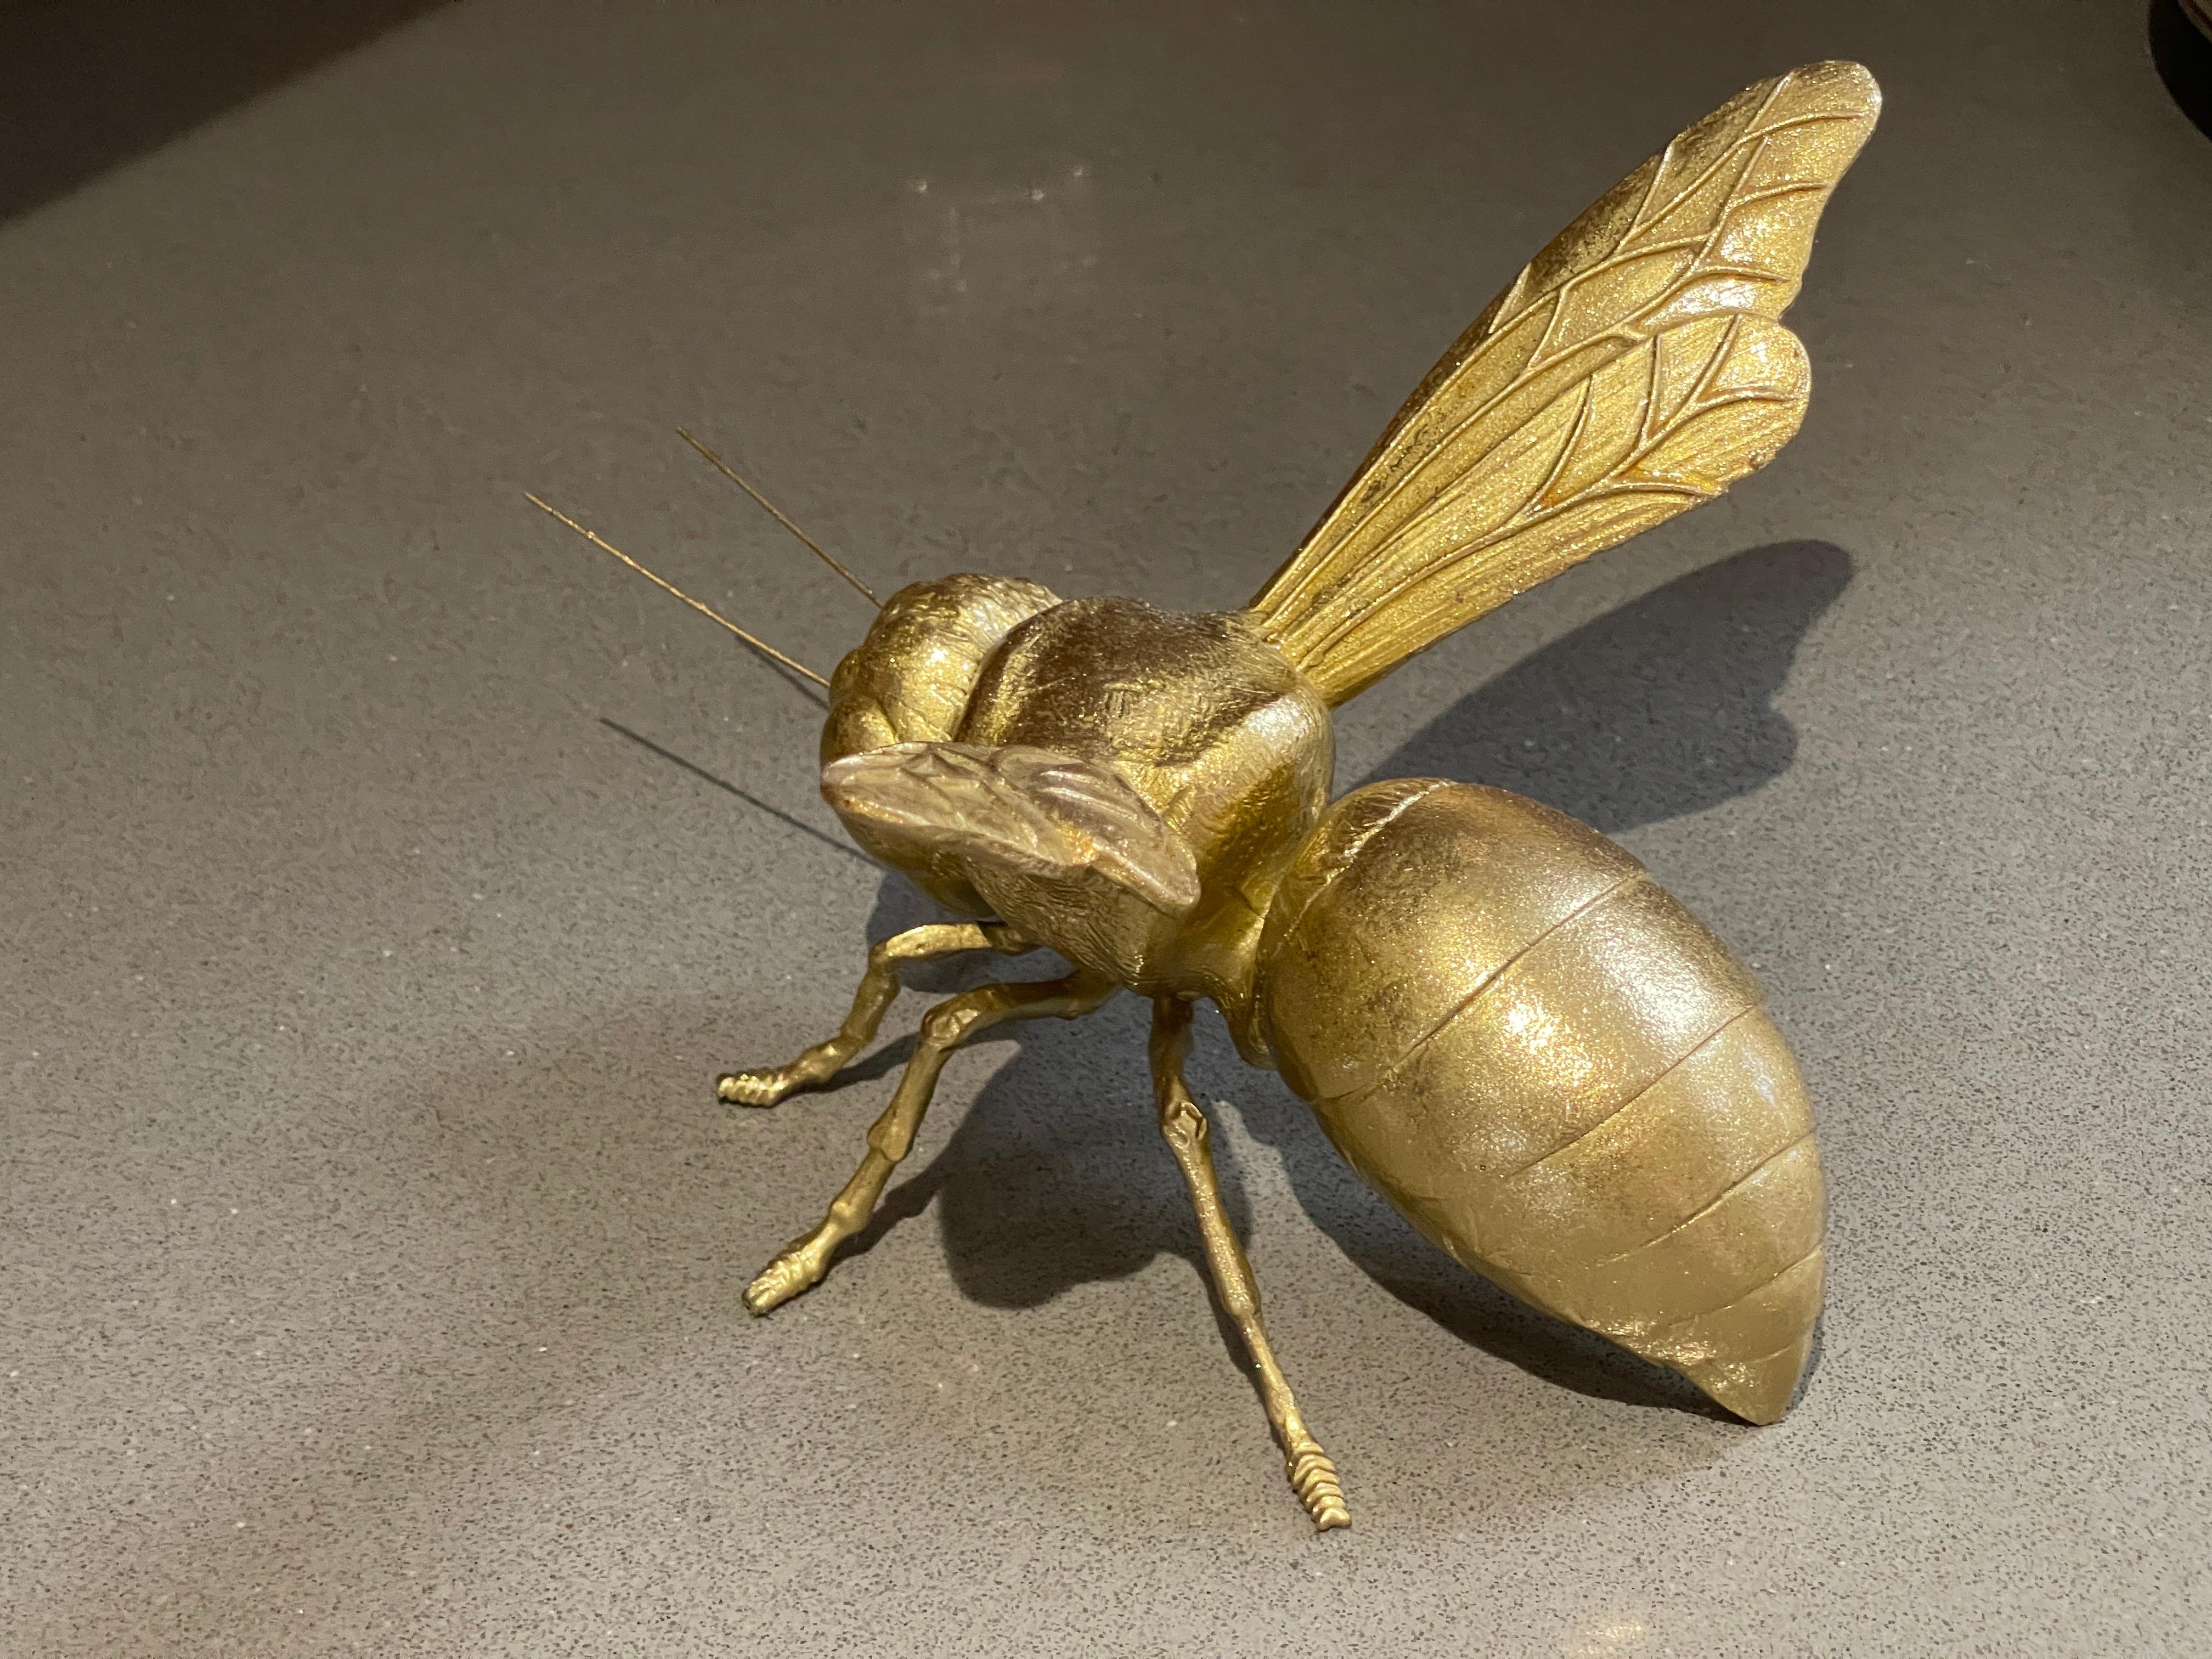 Vintage Decorative Gold Bee Ornament Bumble Bee Sculpture LUXURY ORNAMENT GOLD  For Sale 1